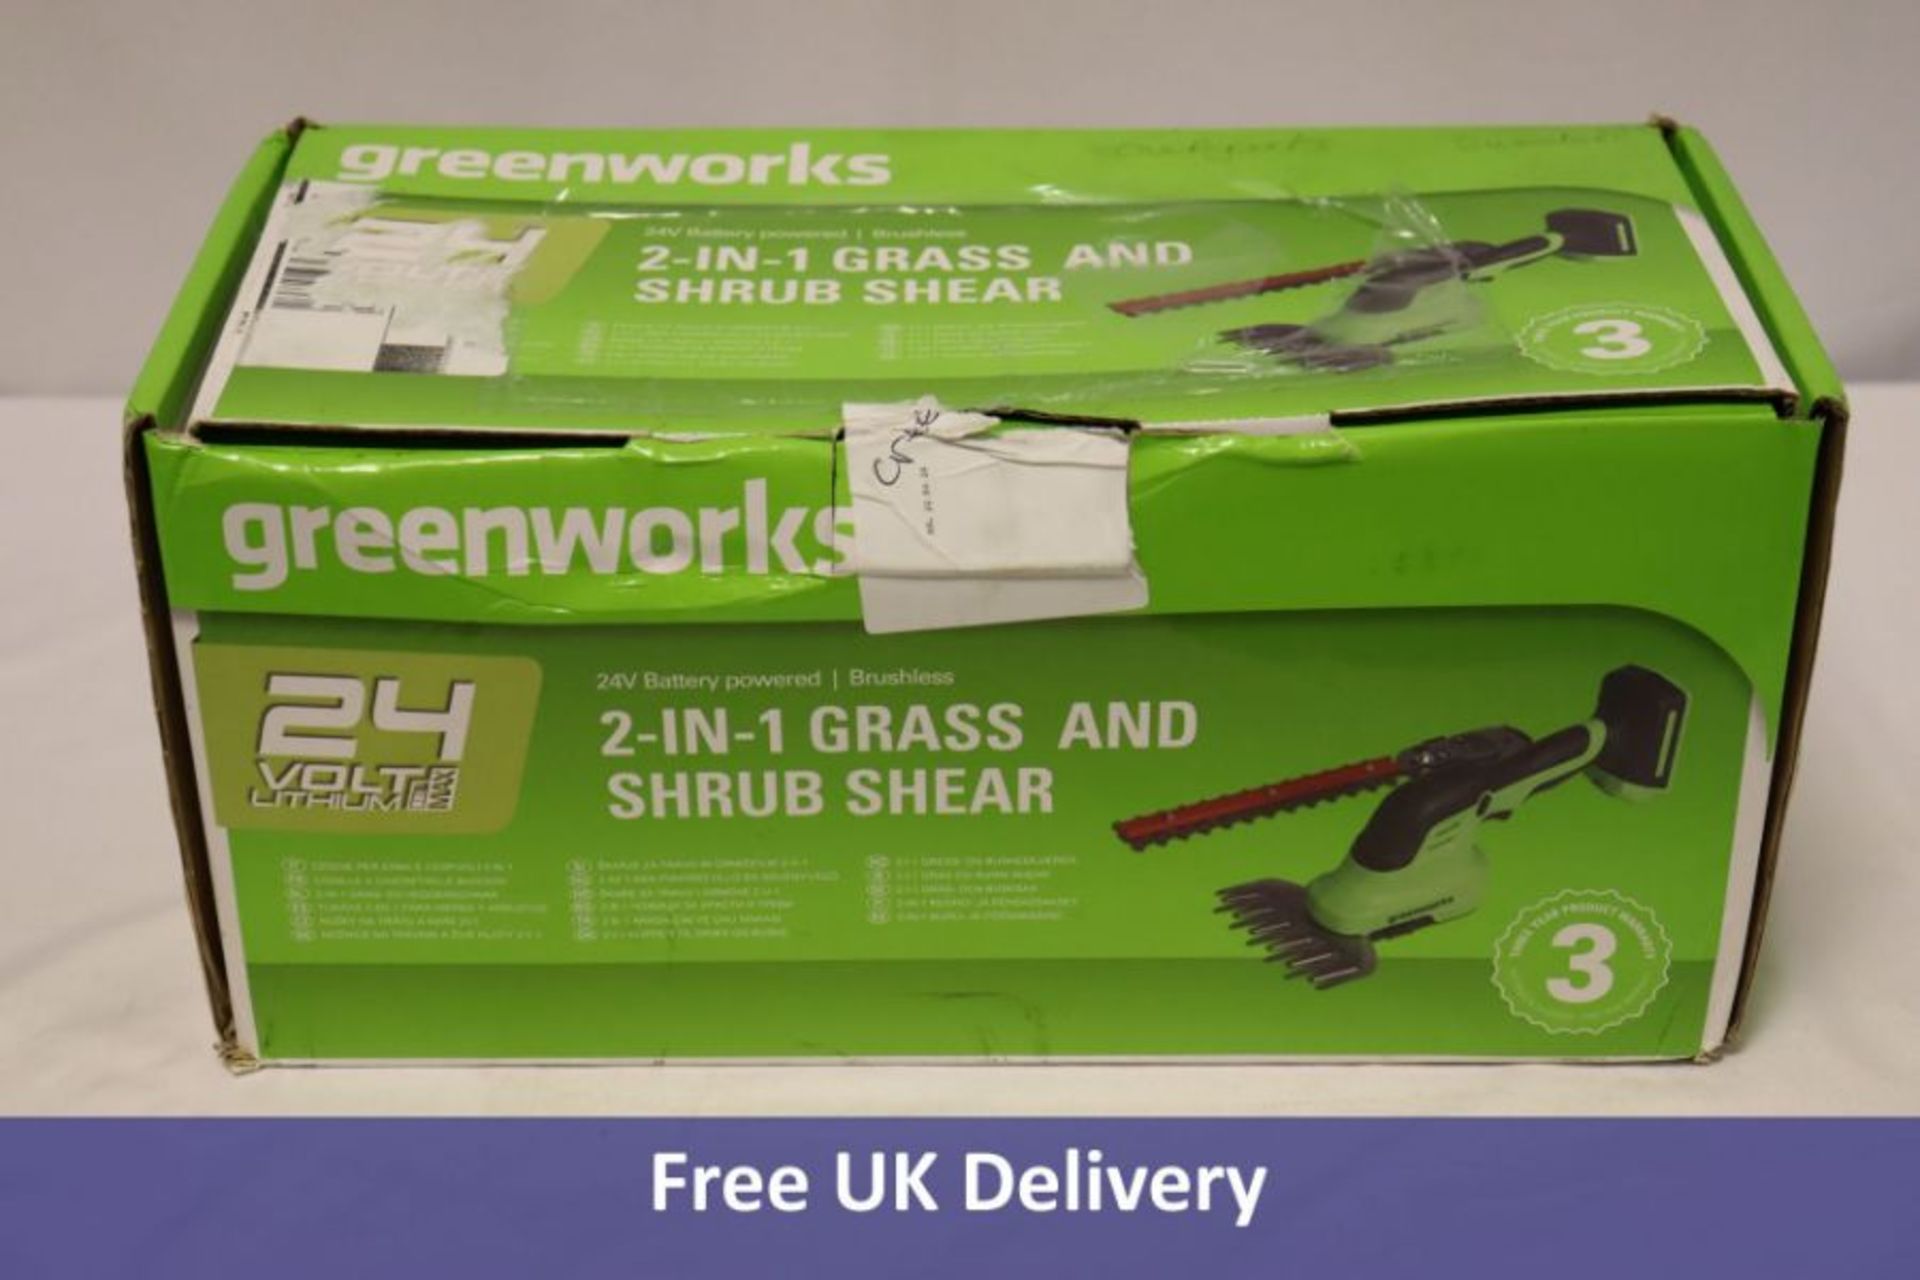 GreenWorks 2 in 1 24V Cordless Grass Shrub Shears. Used, not tested